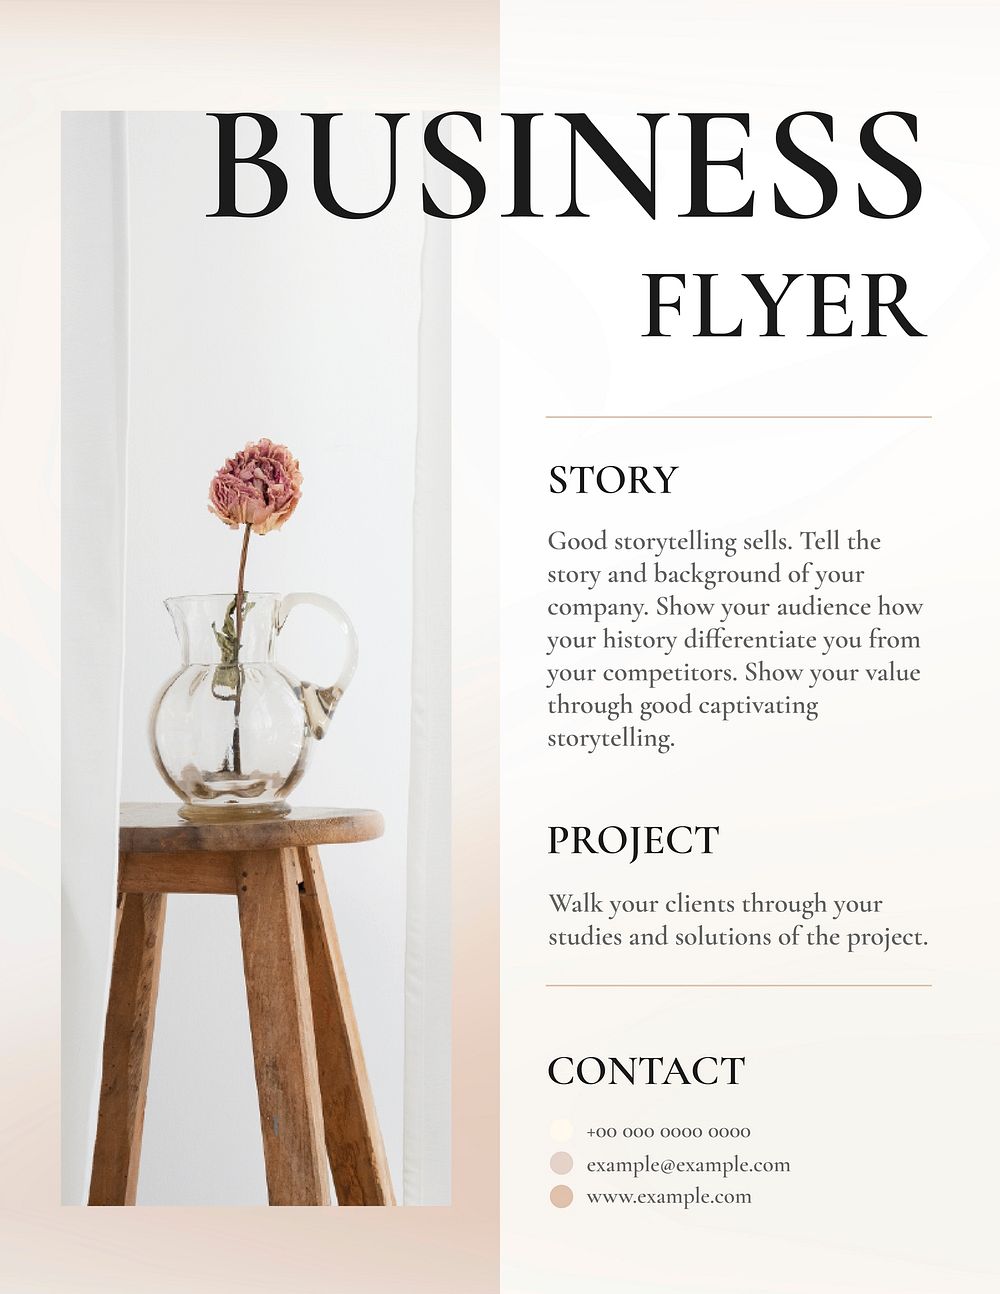 Beauty business flyer template vector in earth tone